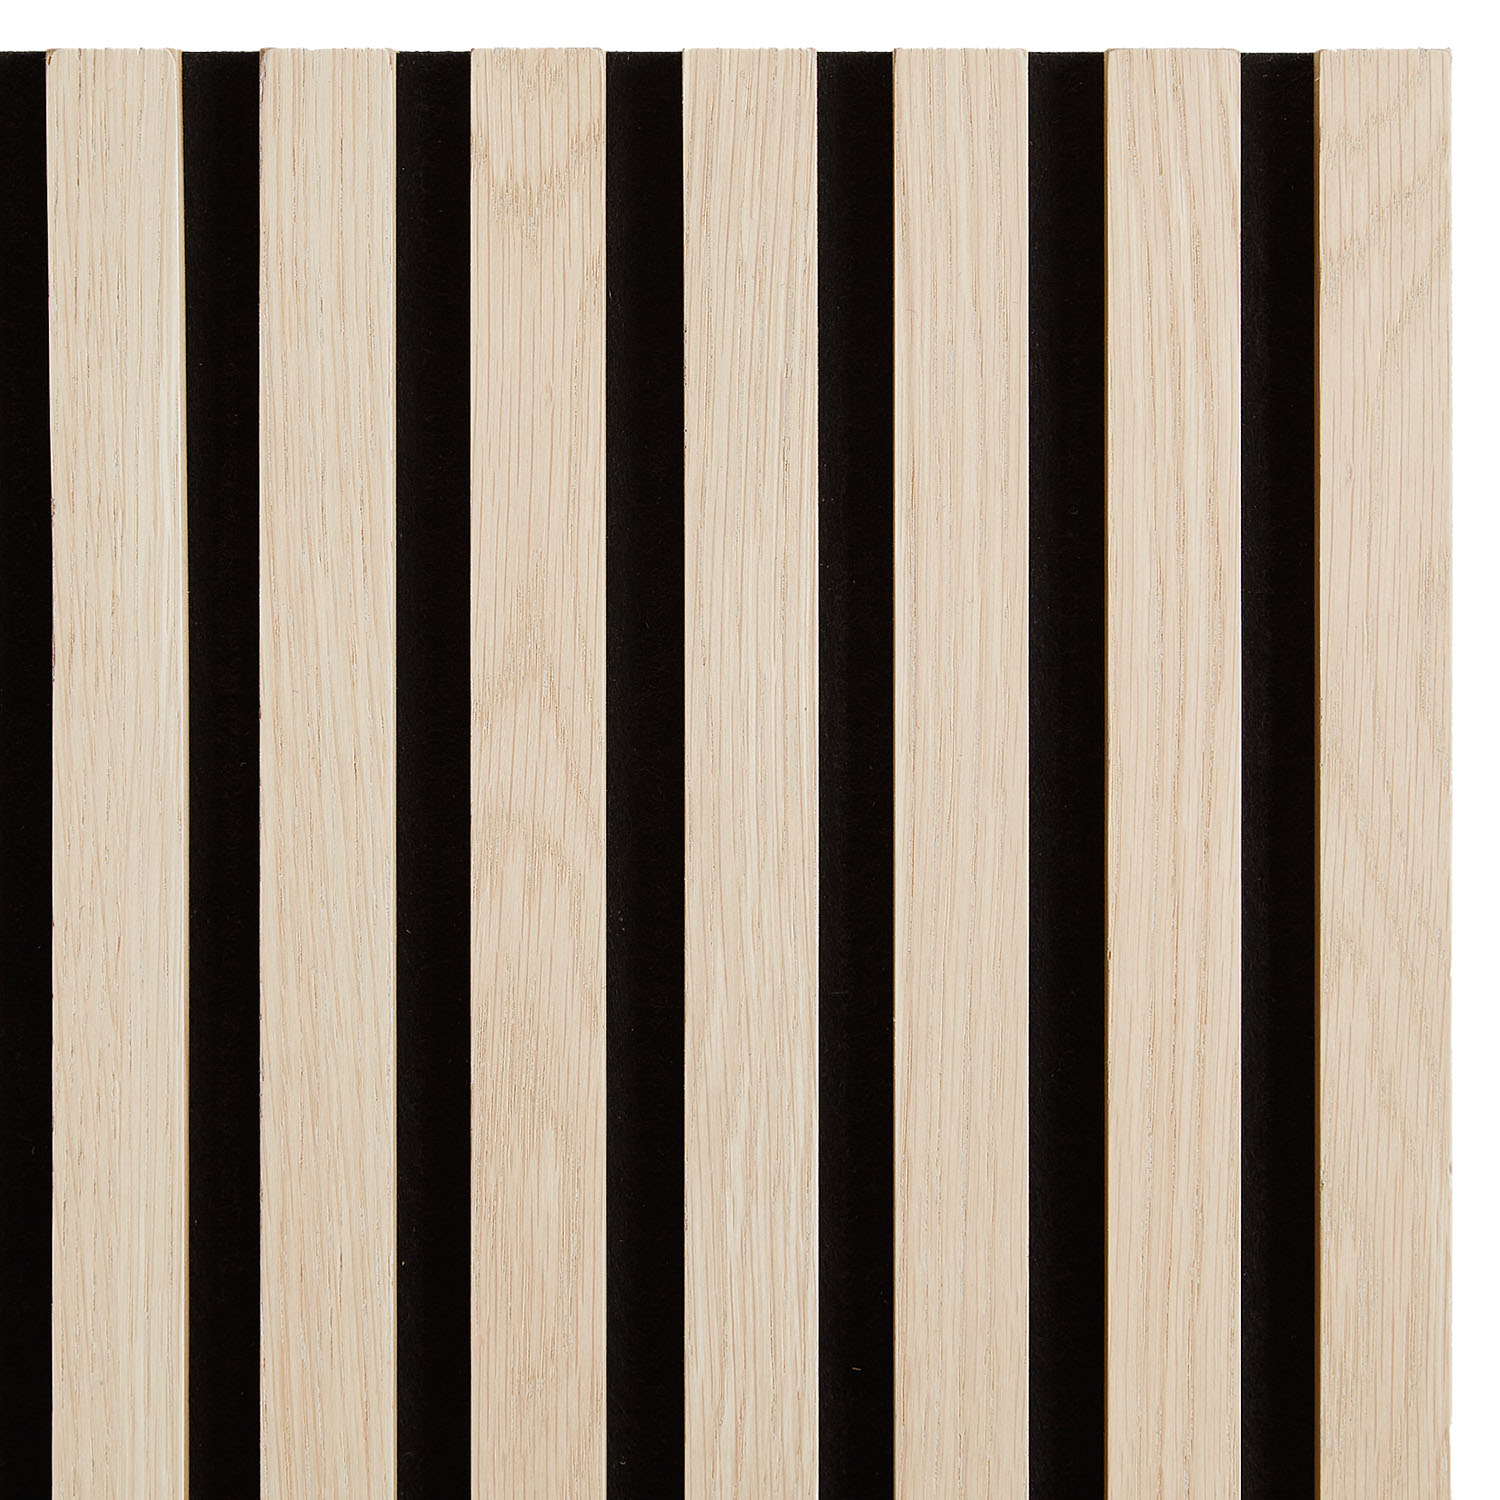 2 Wall panels 60 x 120 cm Natural wood paneling for walls Acoustic panels Bedroom paneling Wall cladding Acoustic sound panels Sound proof panels